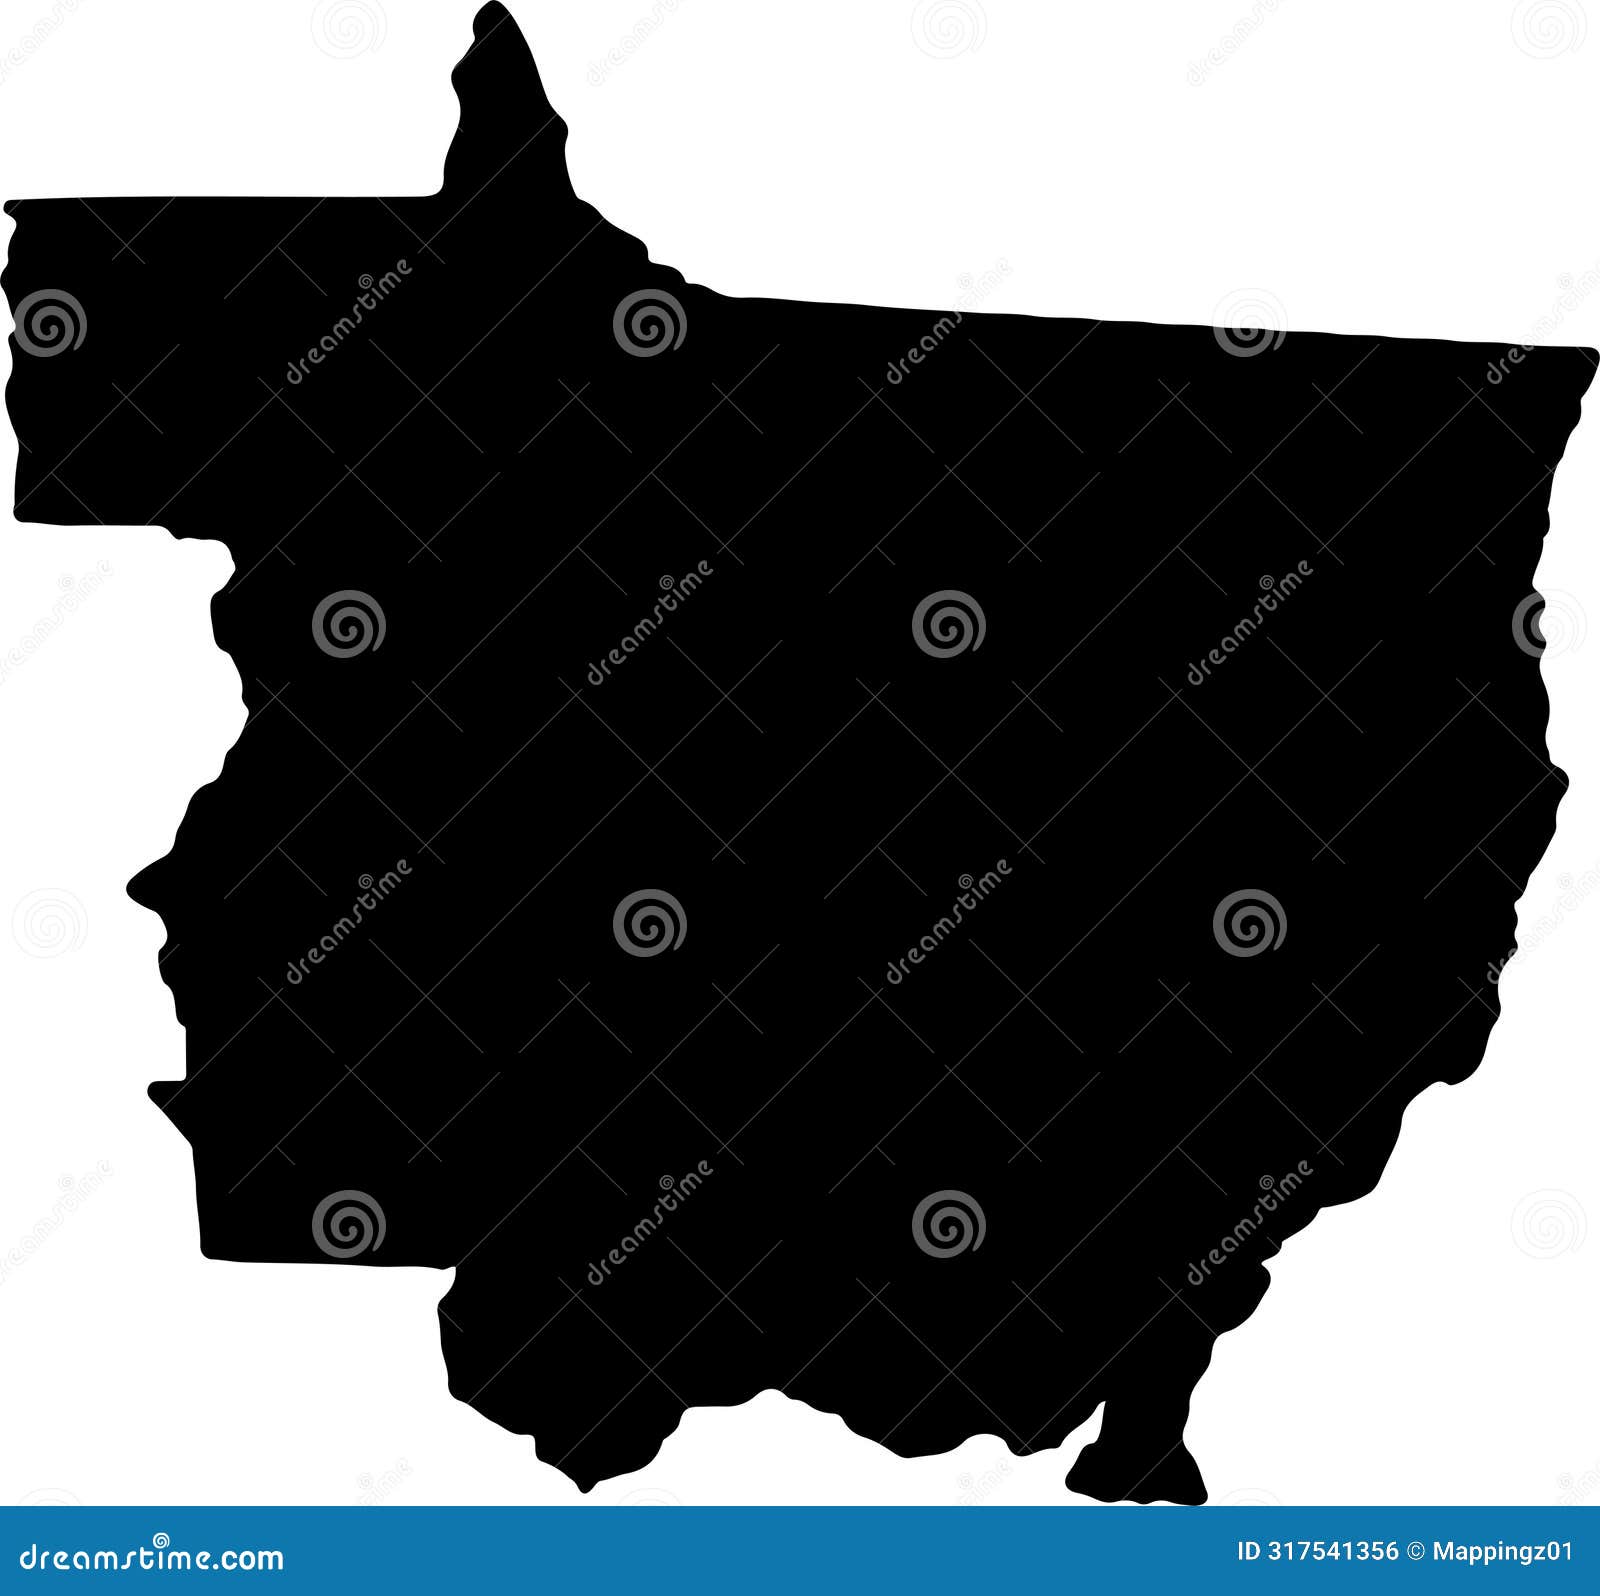 mato grosso brazil silhouette map with transparent background